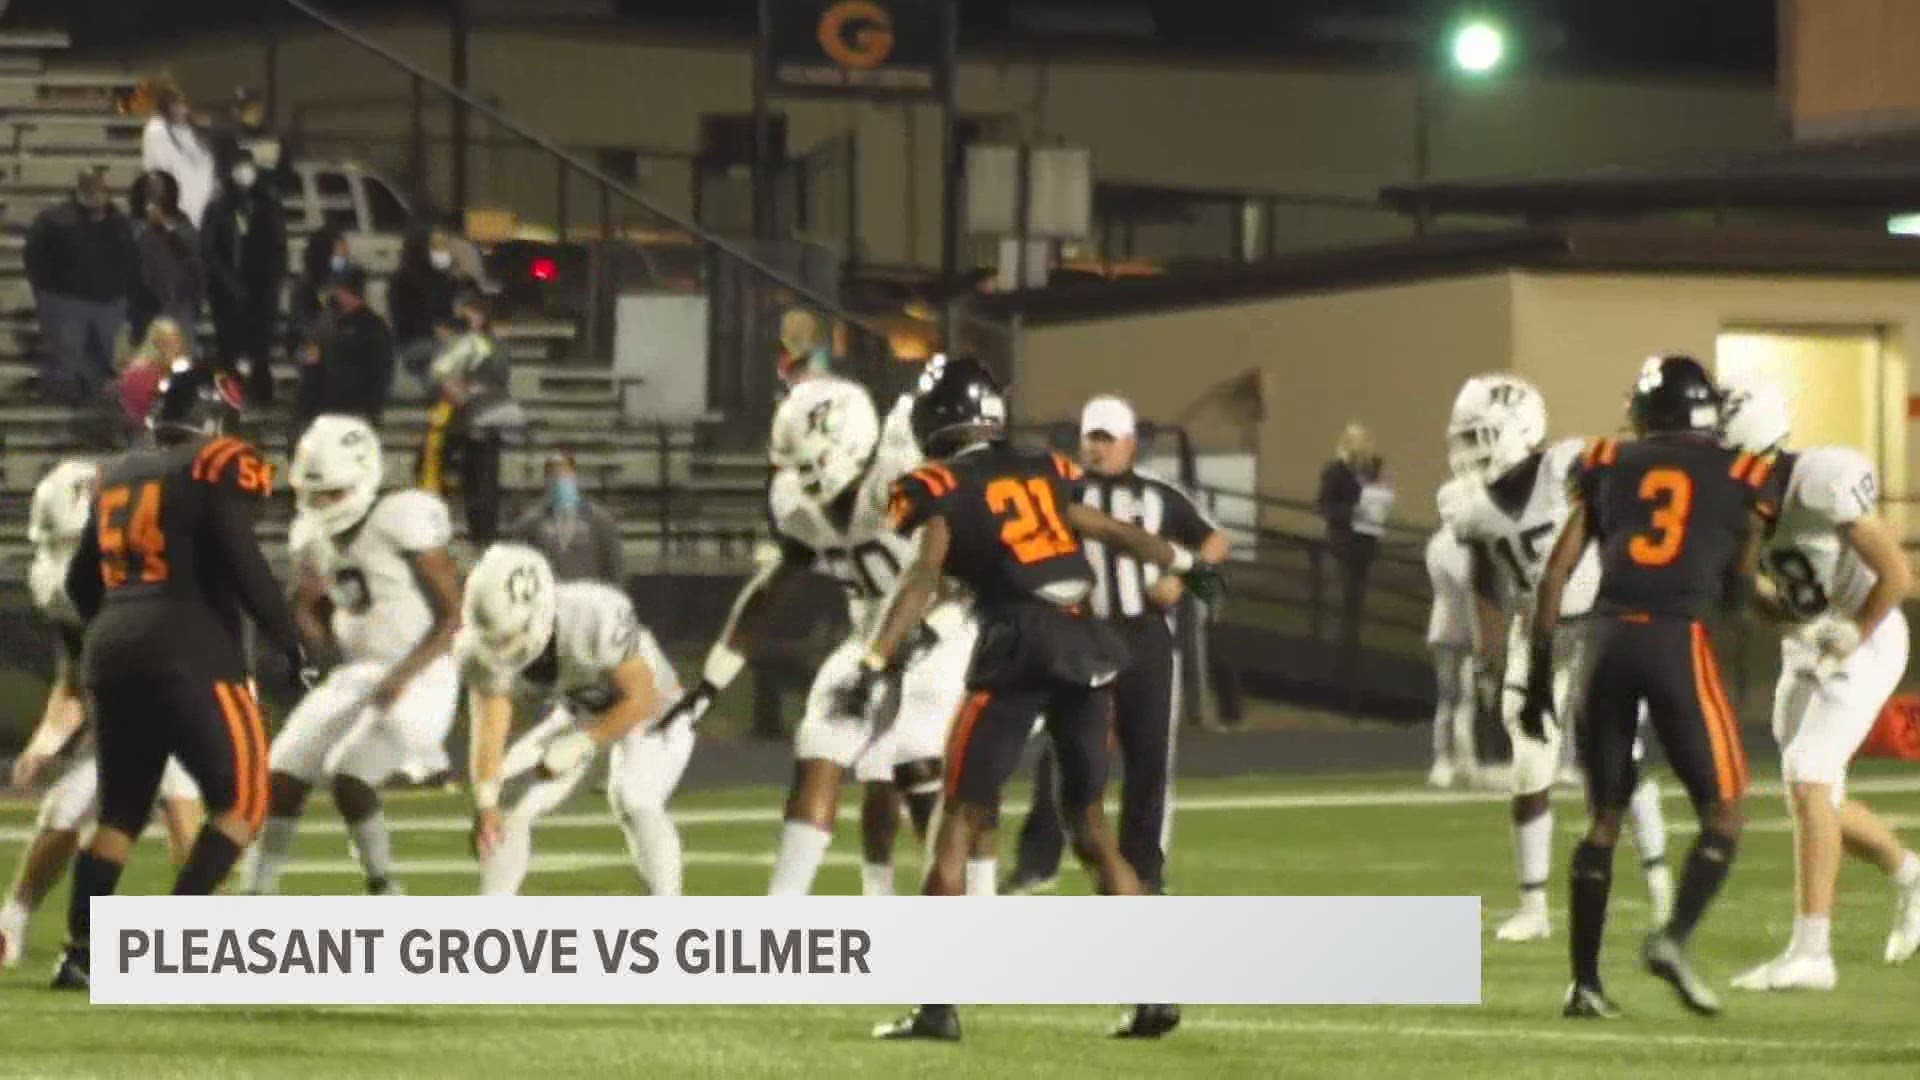 The Pleasant Grove Hawks traveled to Gilmer to take on the Buckeyes for some Friday football action.